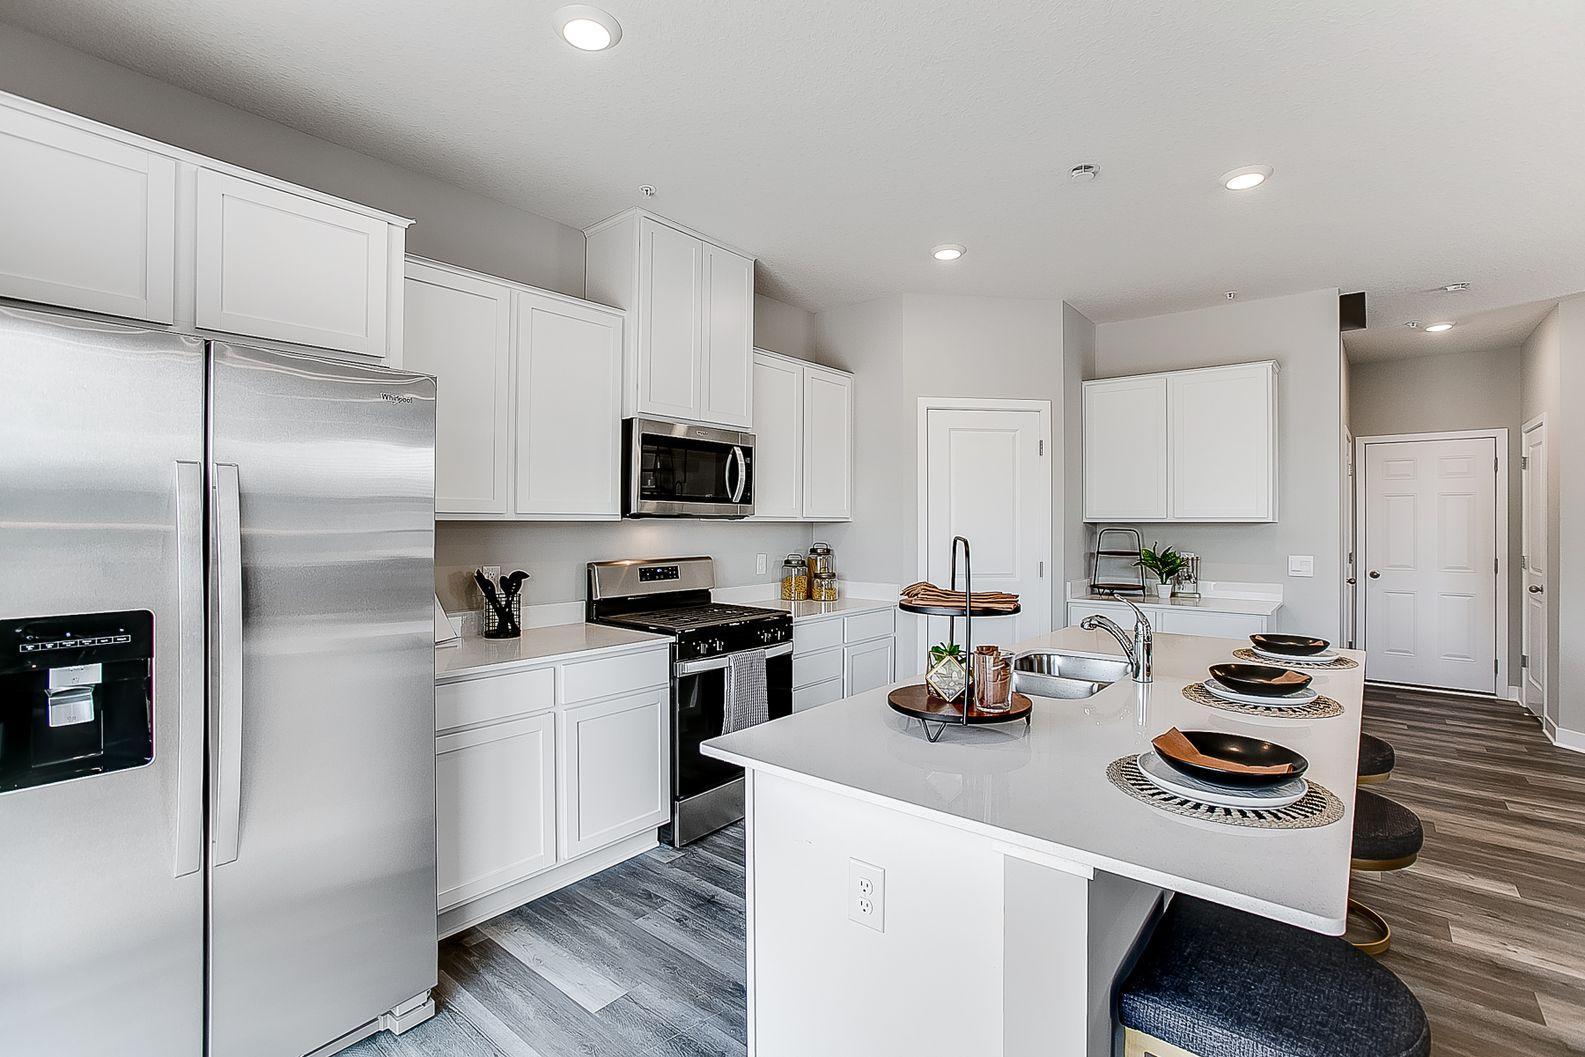 Stainless steel appliances featuring a gas range and microwave that vents to the exterior.